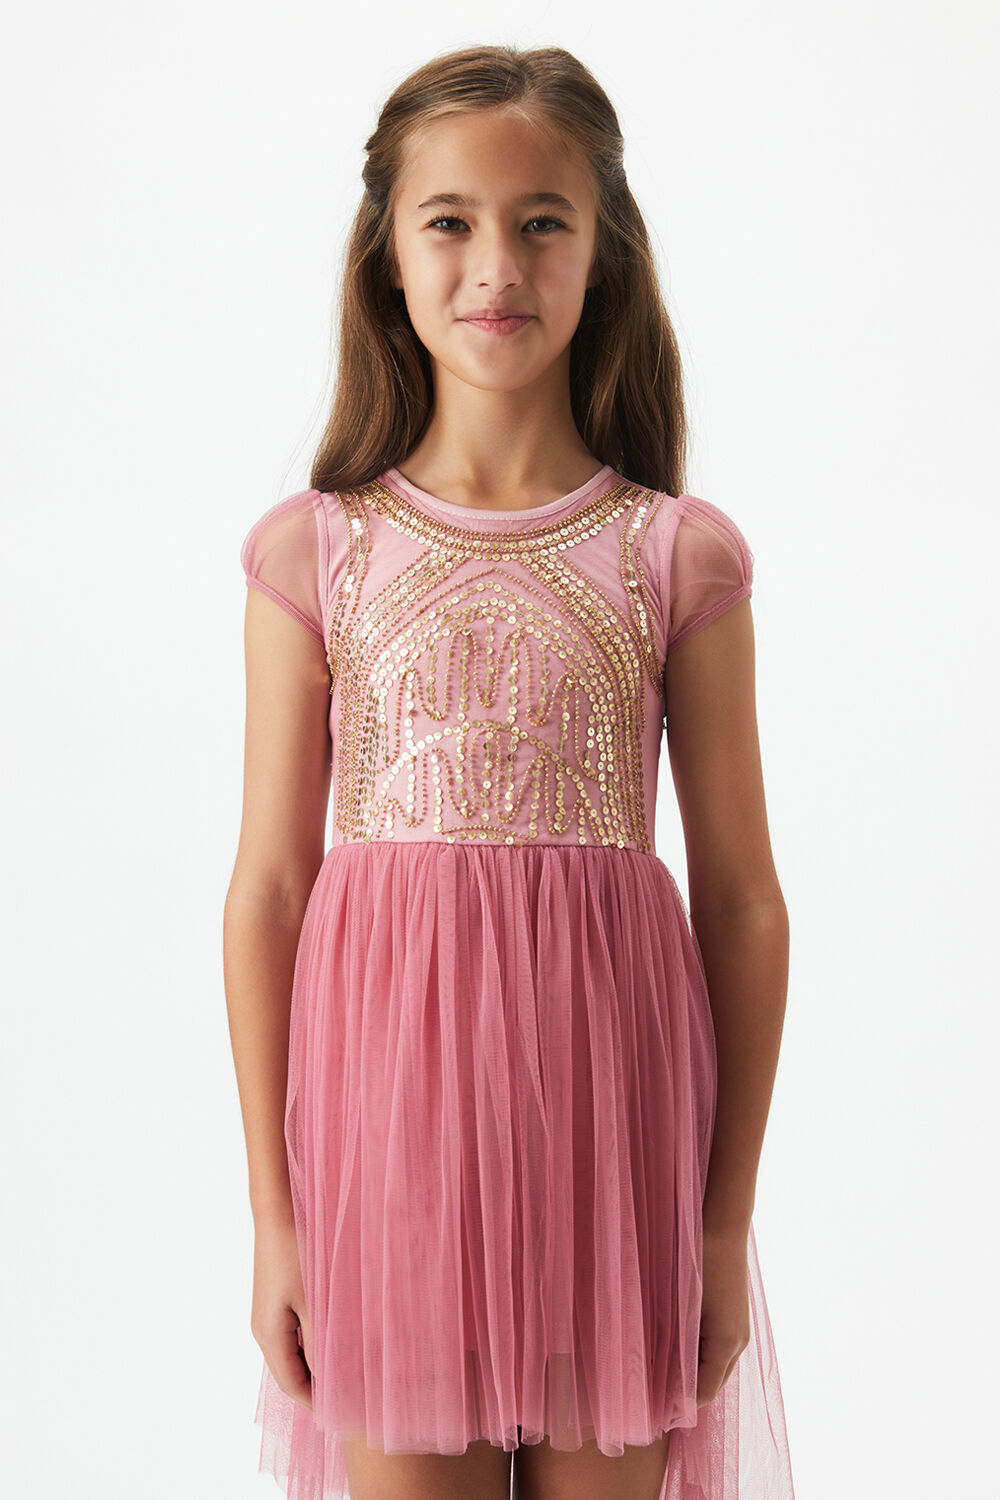 GIRLS TAYLOR SEQUIN DRESS in colour PETAL PINK